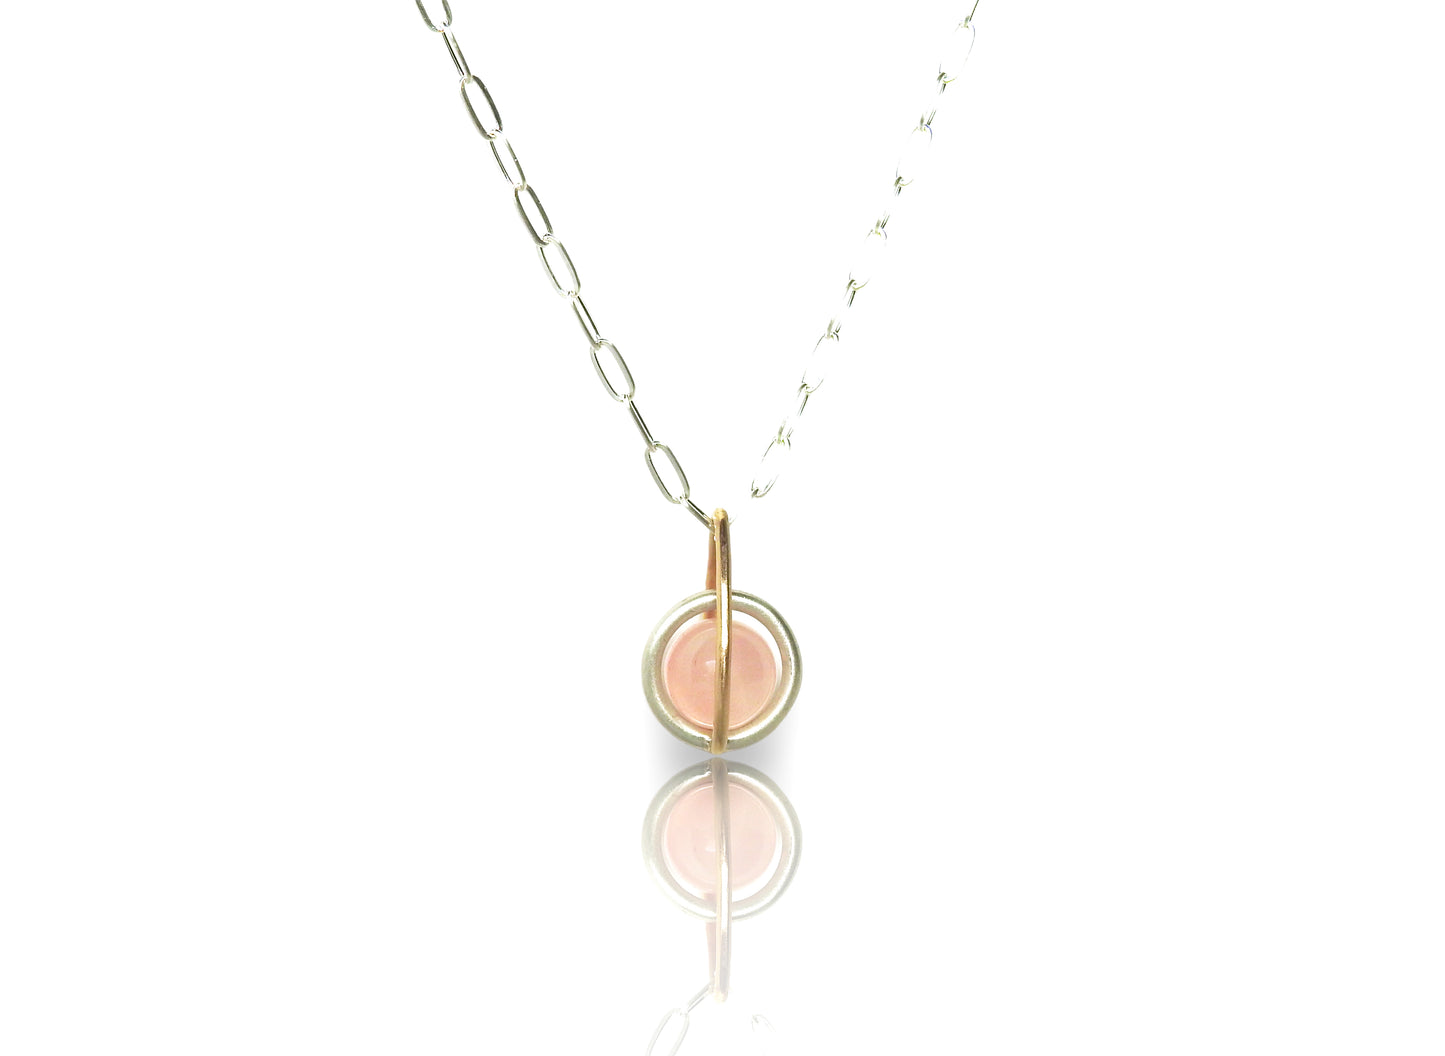 Floating rose quarts sphere pendant with gold drop shape link, sterling silver centre round link gently holding an un-drilled 8.5 mm rose quartz stone, free floating emphasizing space and freedom., by ZEALmetal, Nicole Horlor, in Kingston, ON, Canada